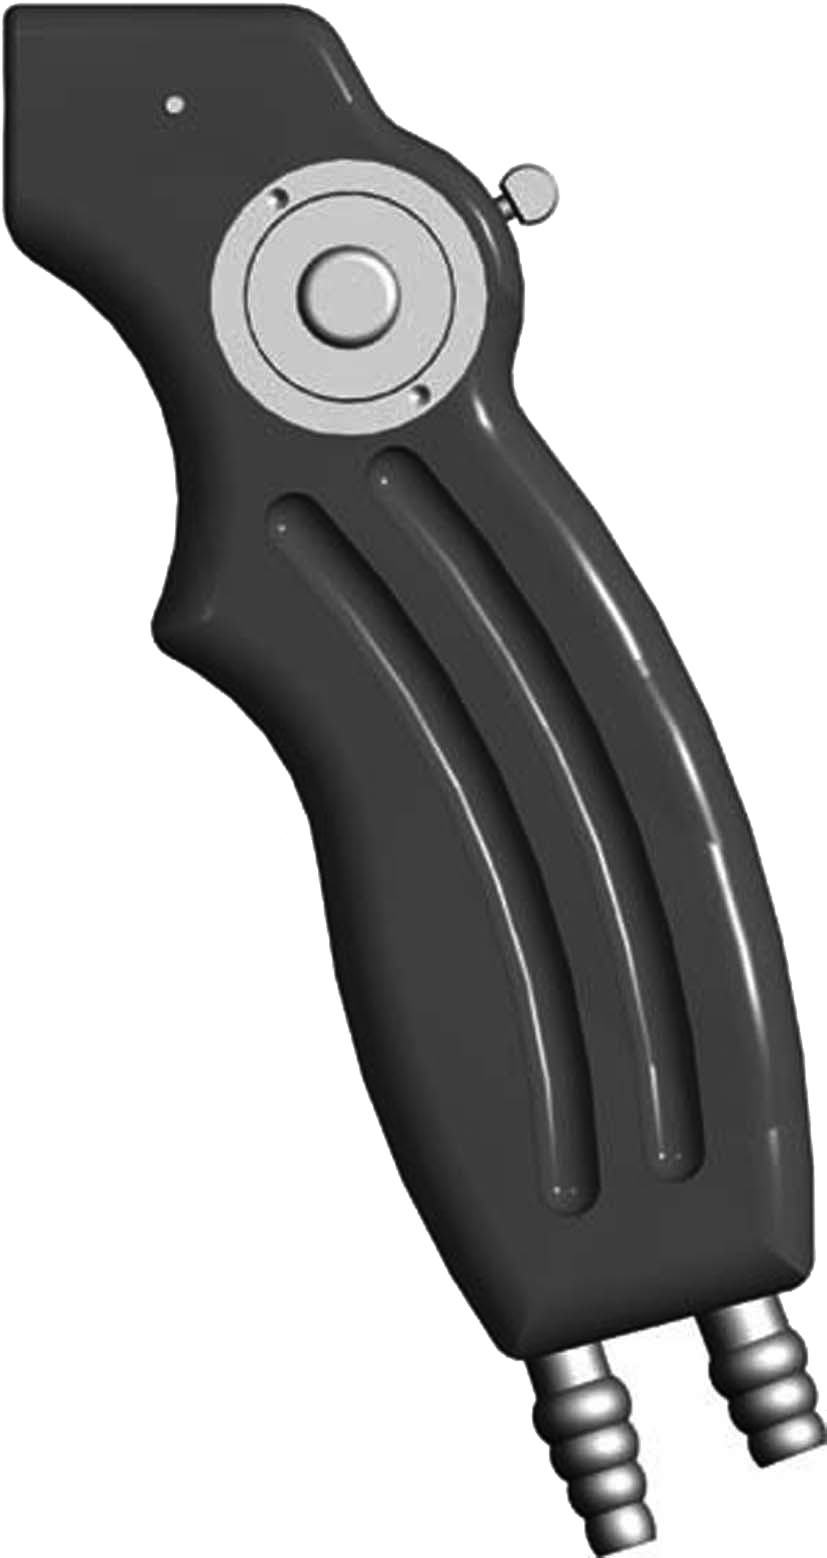 SUCTION-IRRIGATION PISTOL HANDLE WITH 2- WAY SLIDING VALVE AND TUBE CONNECTIONS 